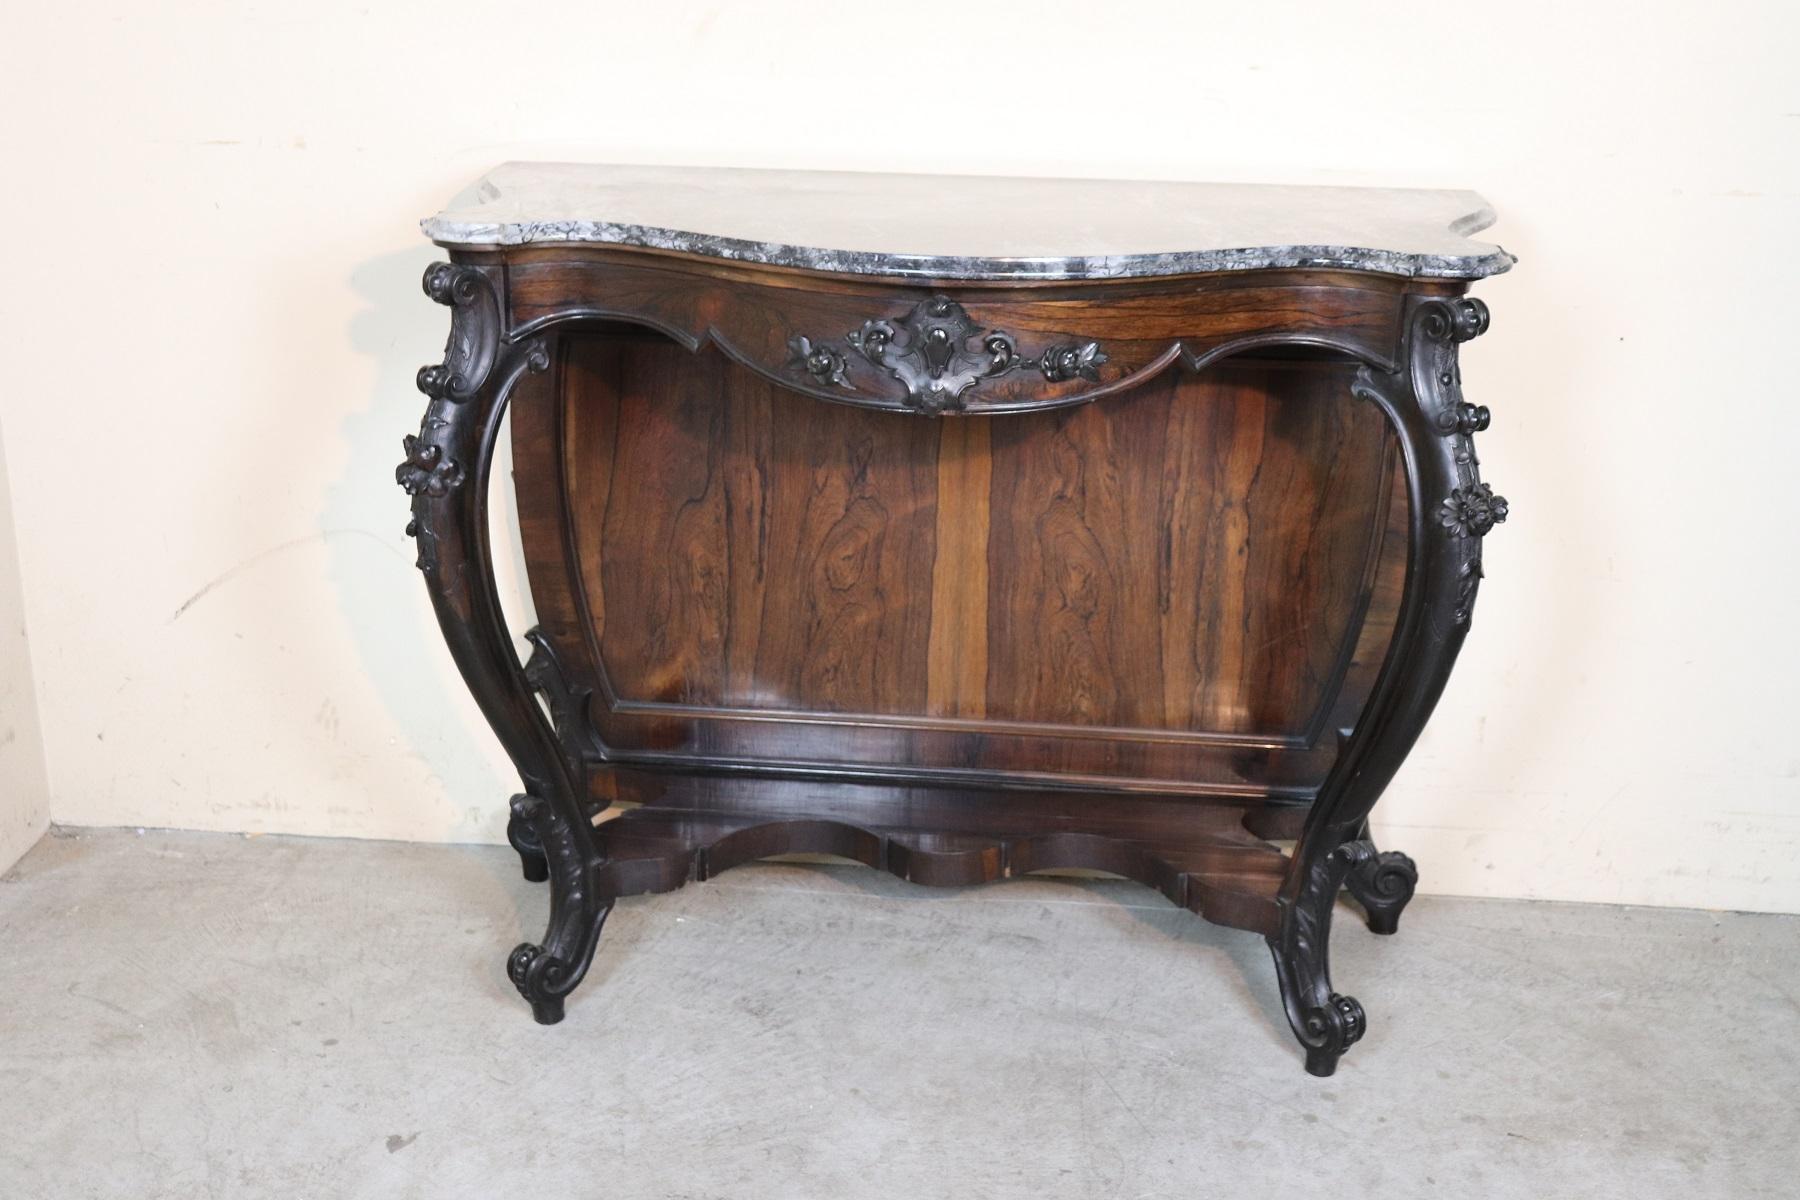 Italian antique console table, circa 1845. Characterized by precious rosewood with wood carving. Refined Genovese carving work performed by an important cabinet maker. Look at the front legs moved enriched with scrolls and flowers carved in the